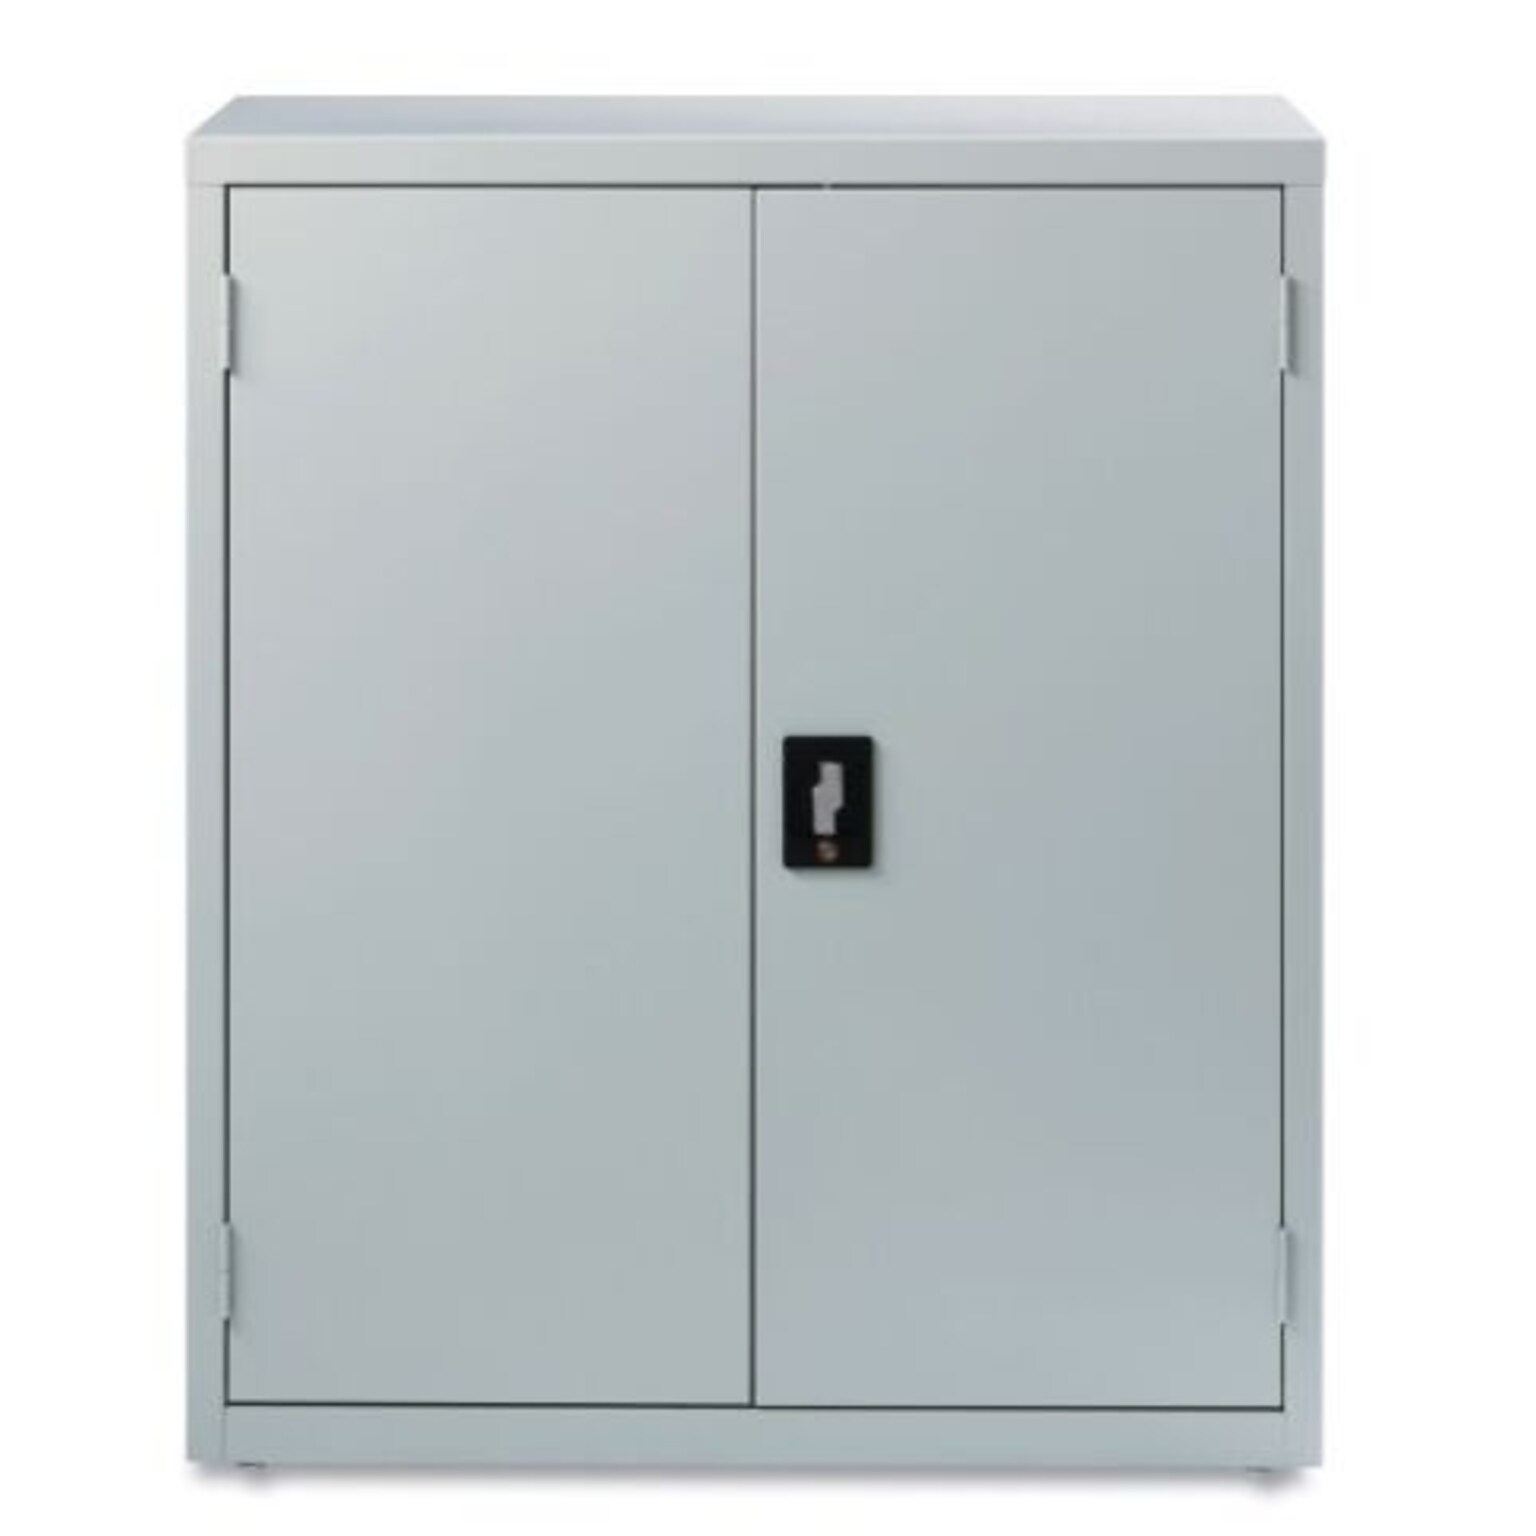 OIF 42H Steel Storage Cabinet with 3 Shelves, Light Gray (CM4218LG)